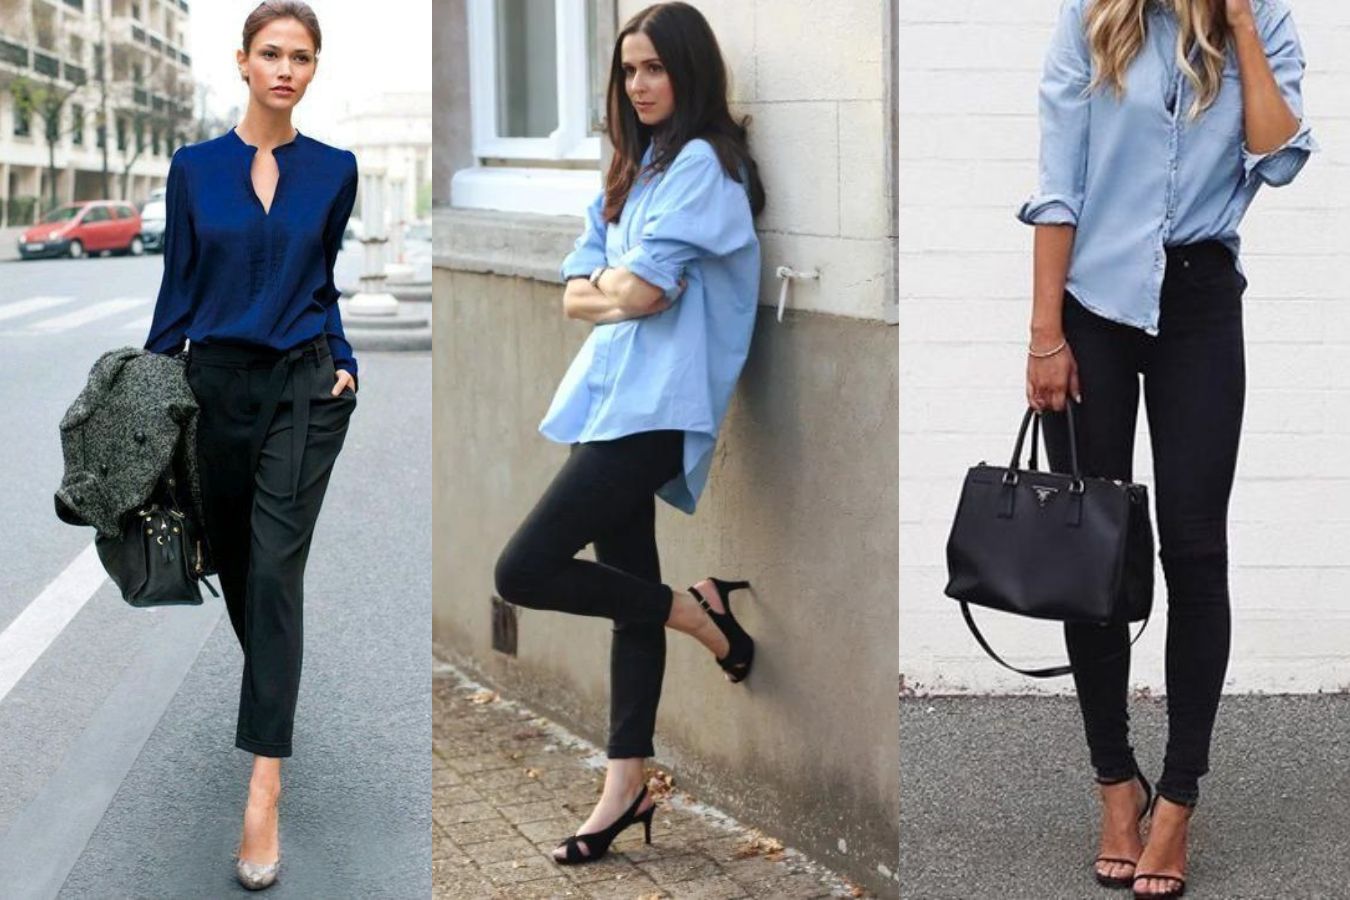 Blue shirts Go With Black Pants